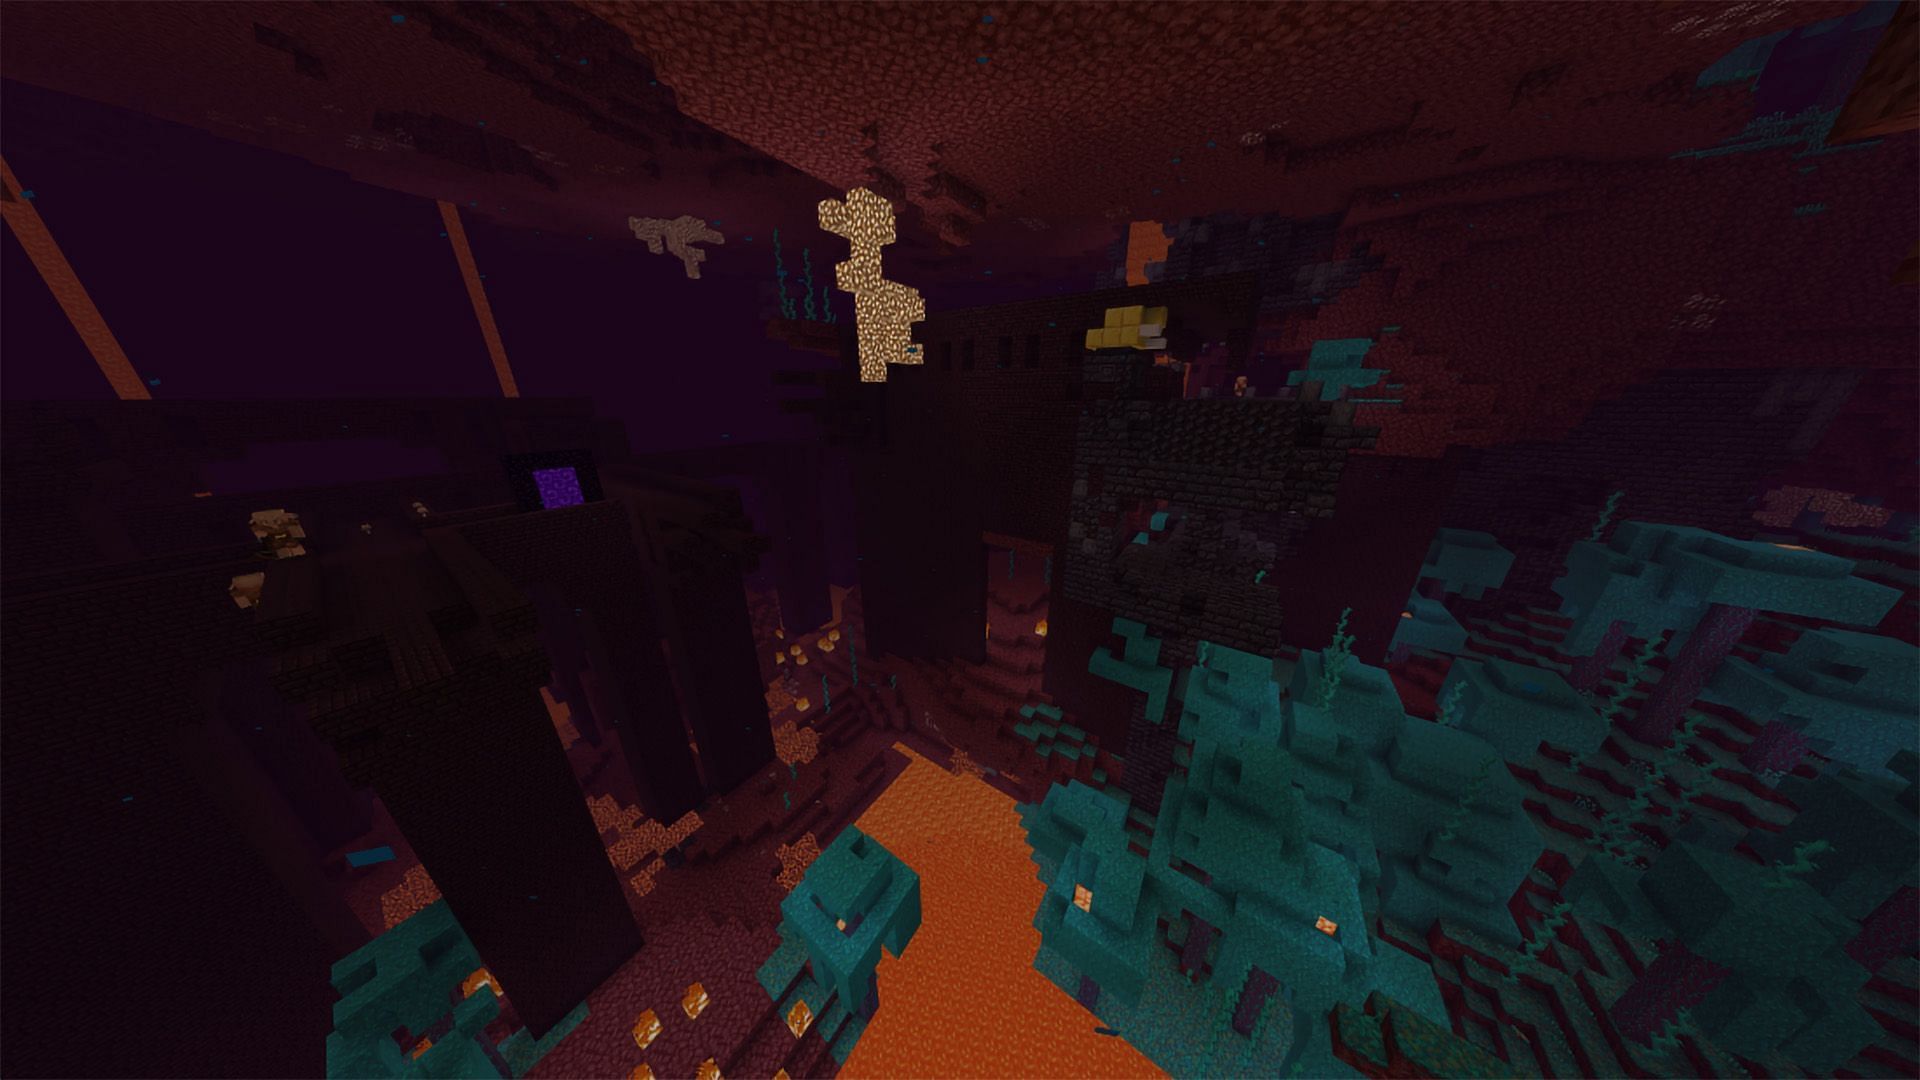 The Nether Fortress is surrounded by a Warped forest biome (Image via Mojang)